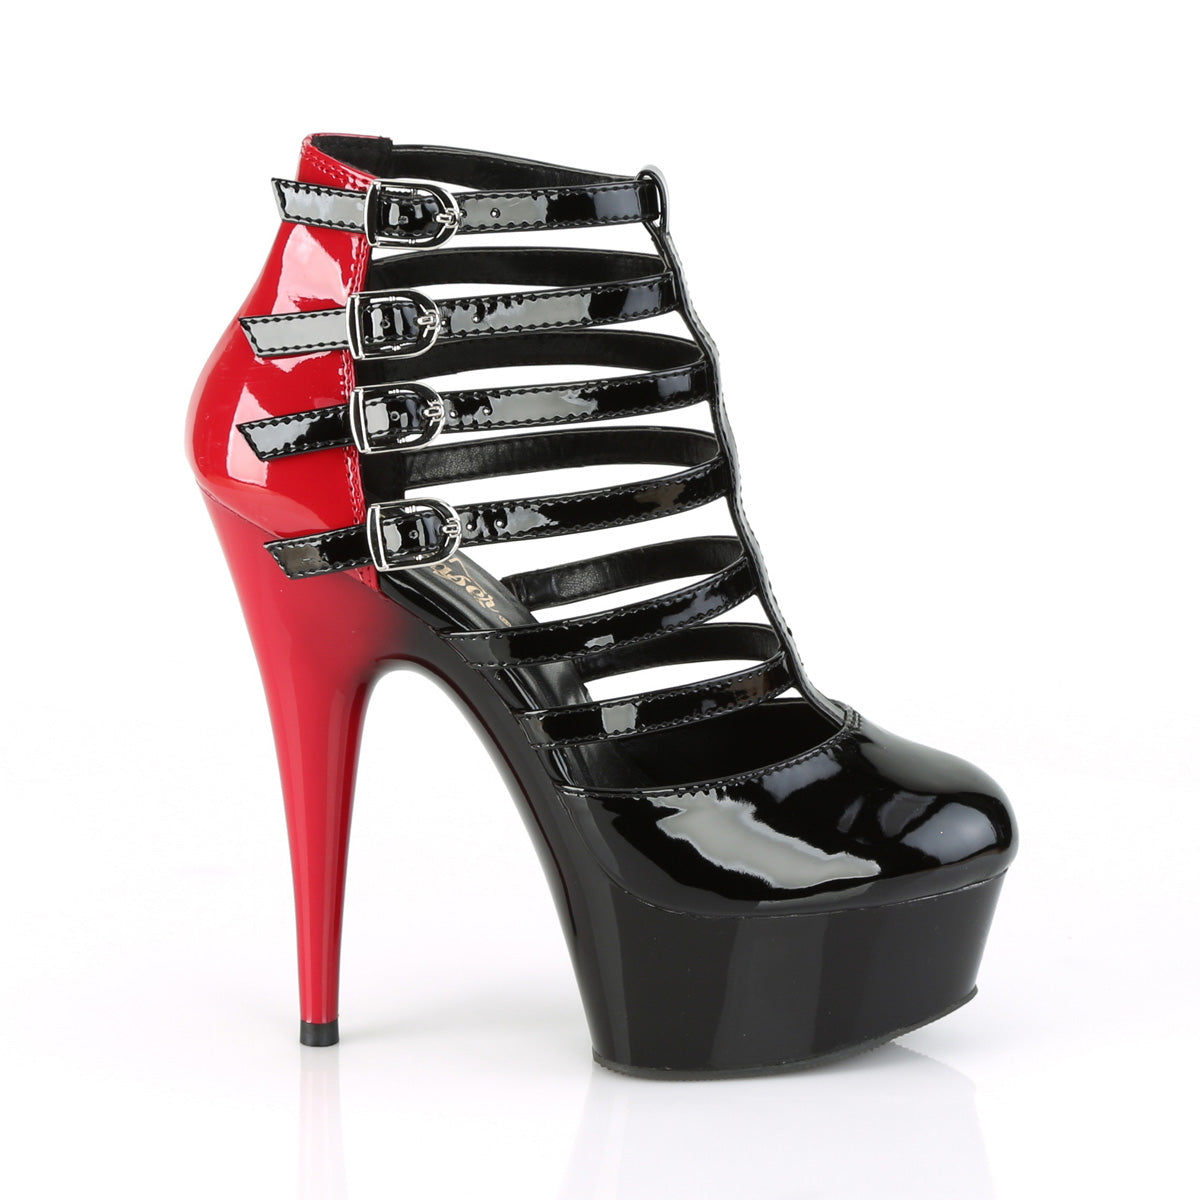 PLEASER DELIGHT-695 RED BLACK 6 INCH HIGH HEEL CAGE BOOTIE SHOES SIZE 7